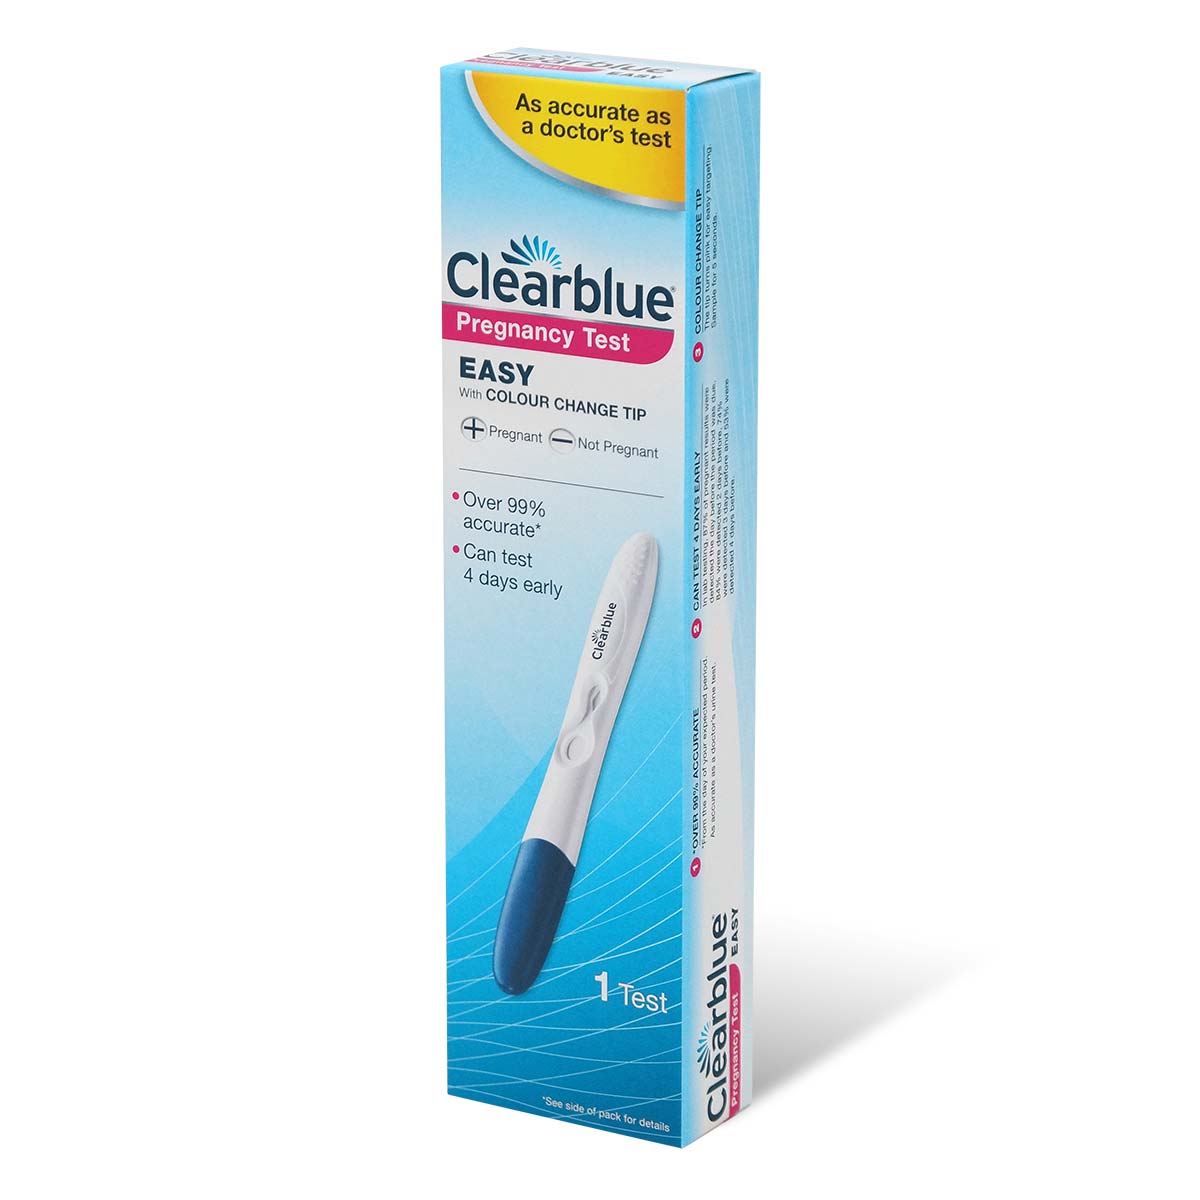 Clearblue PLUS Pregnancy Test with Colour Change Tip-p_1